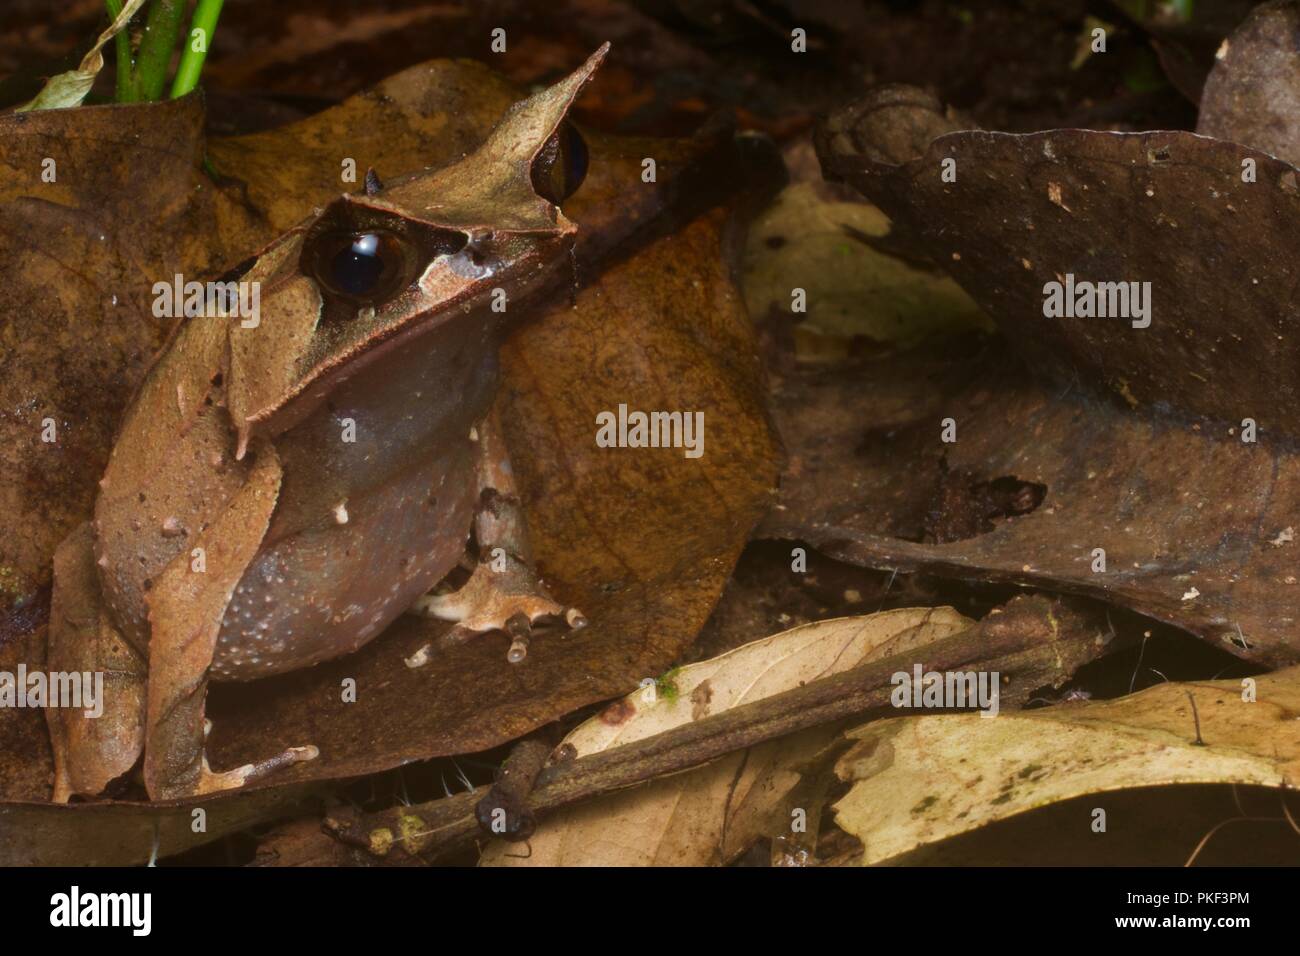 A Malayan Horned Frog (Megophrys nasuta) on the forest floor at night near Poring in Sabah, East Malaysia, Borneo Stock Photo